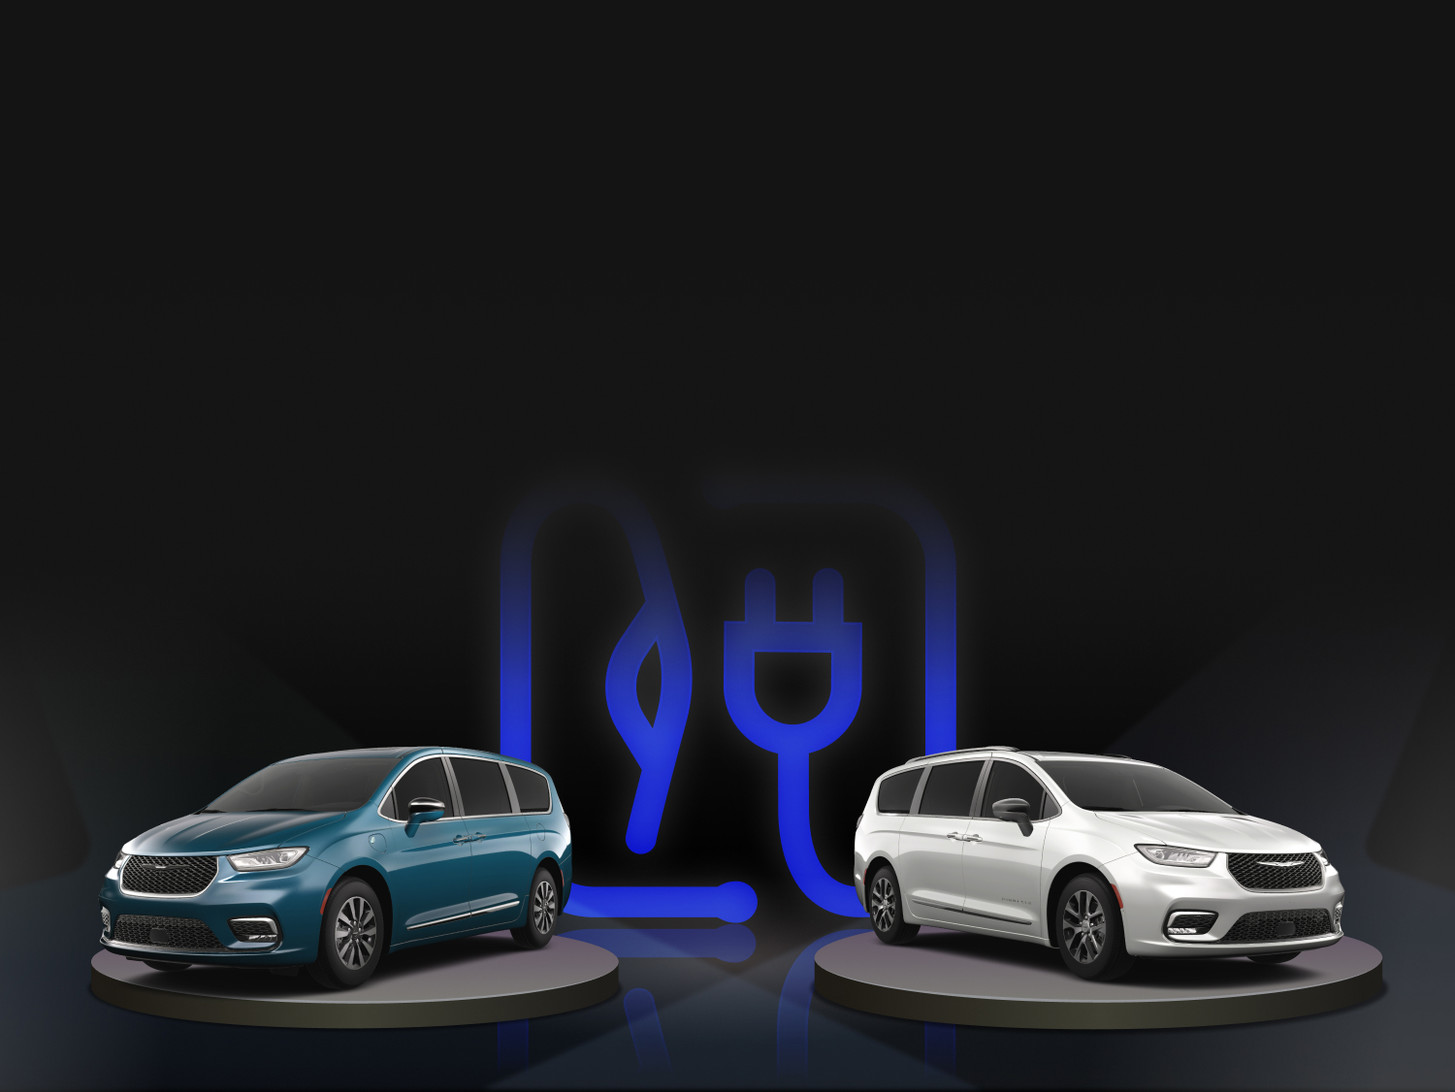 View of a blue 2023 Chrysler EV and a white 2023 Chrysler EV against a black background.